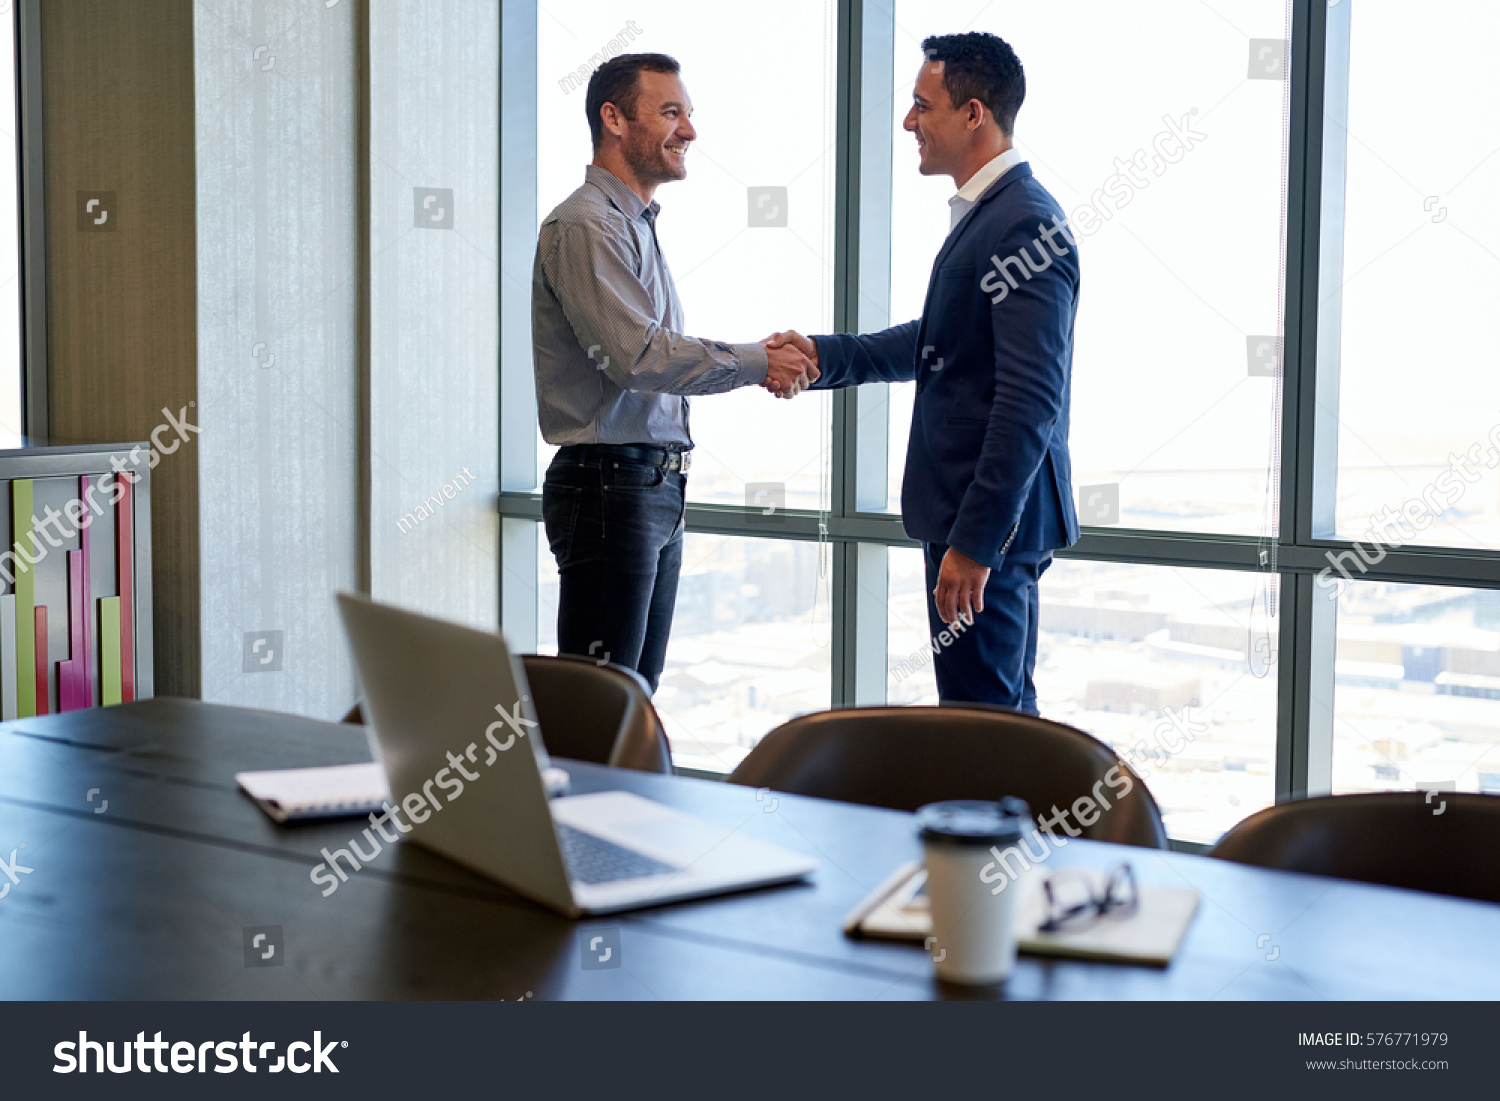 Two smiling businessmen shaking hands together while standing by windows in an office boardroom overlooking the city  #576771979